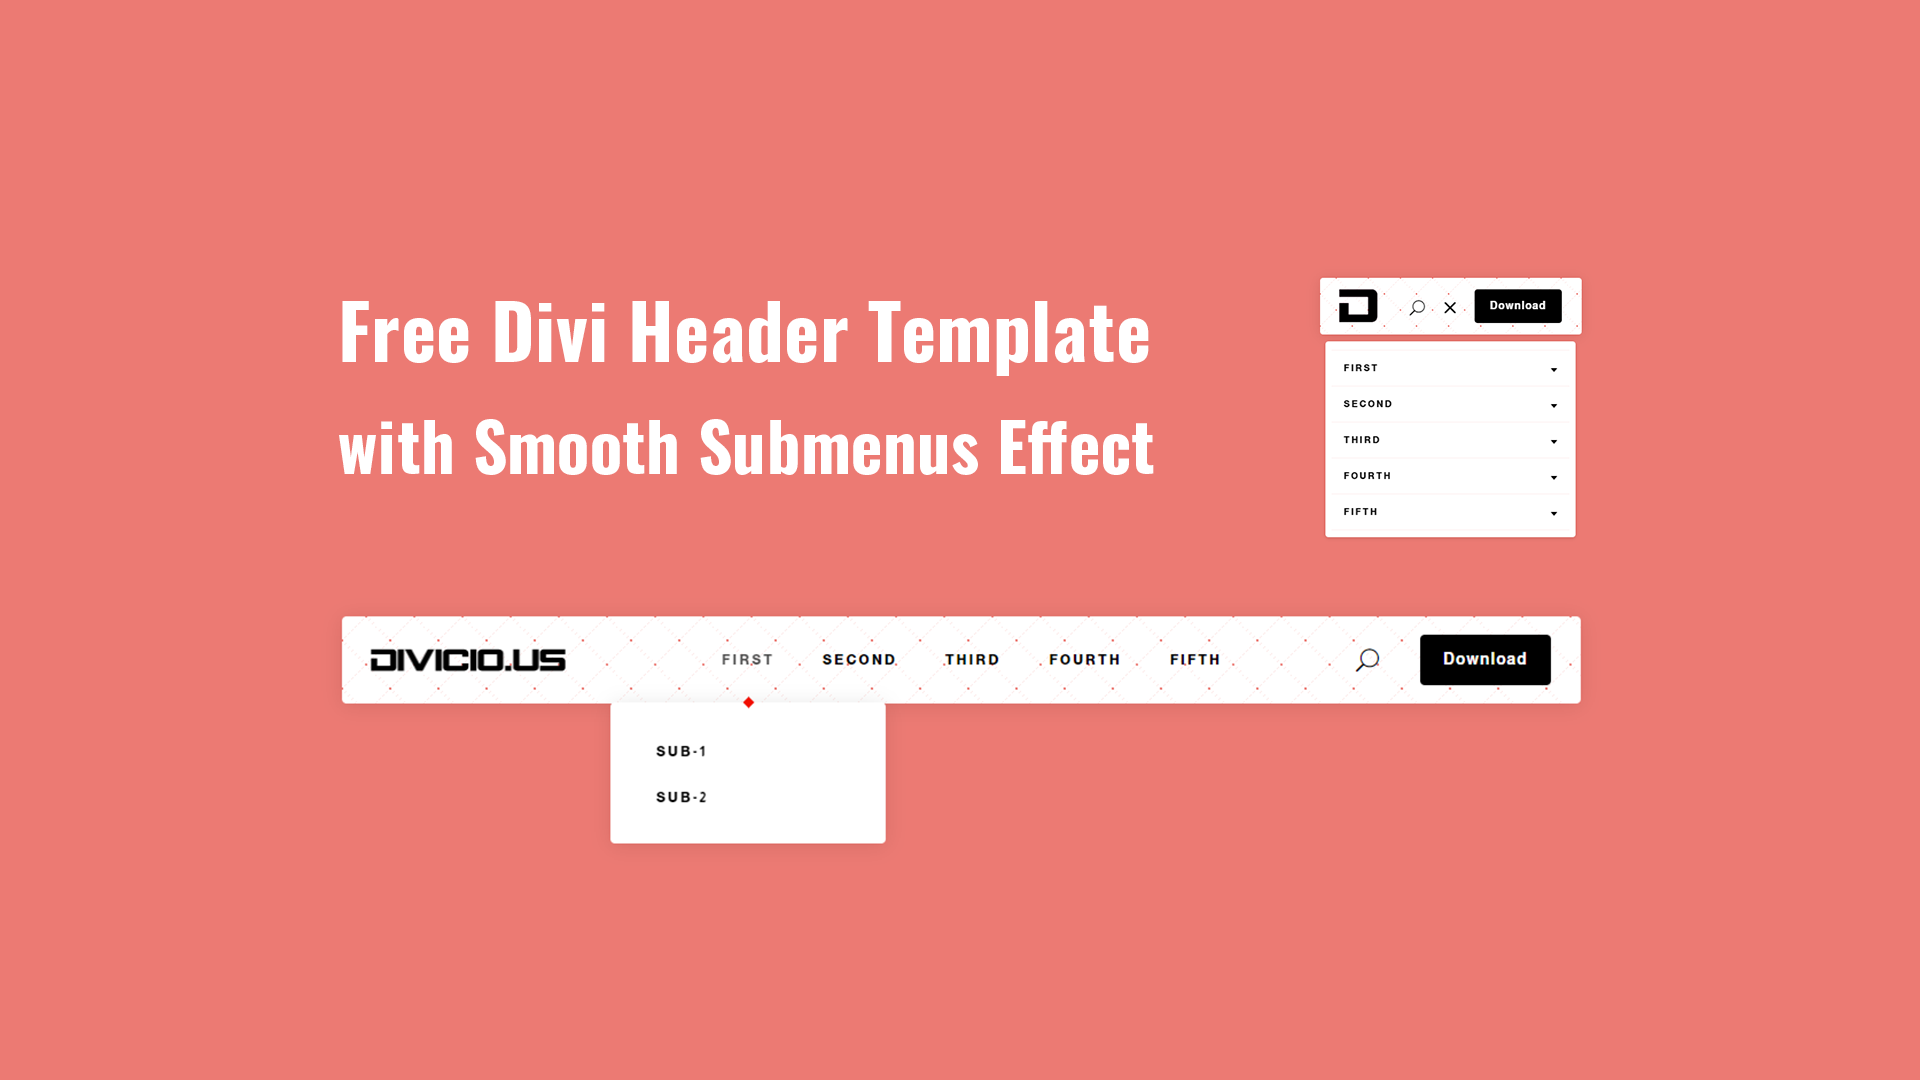 Free Download: Divi Header Template With Smooth Submenus Effect